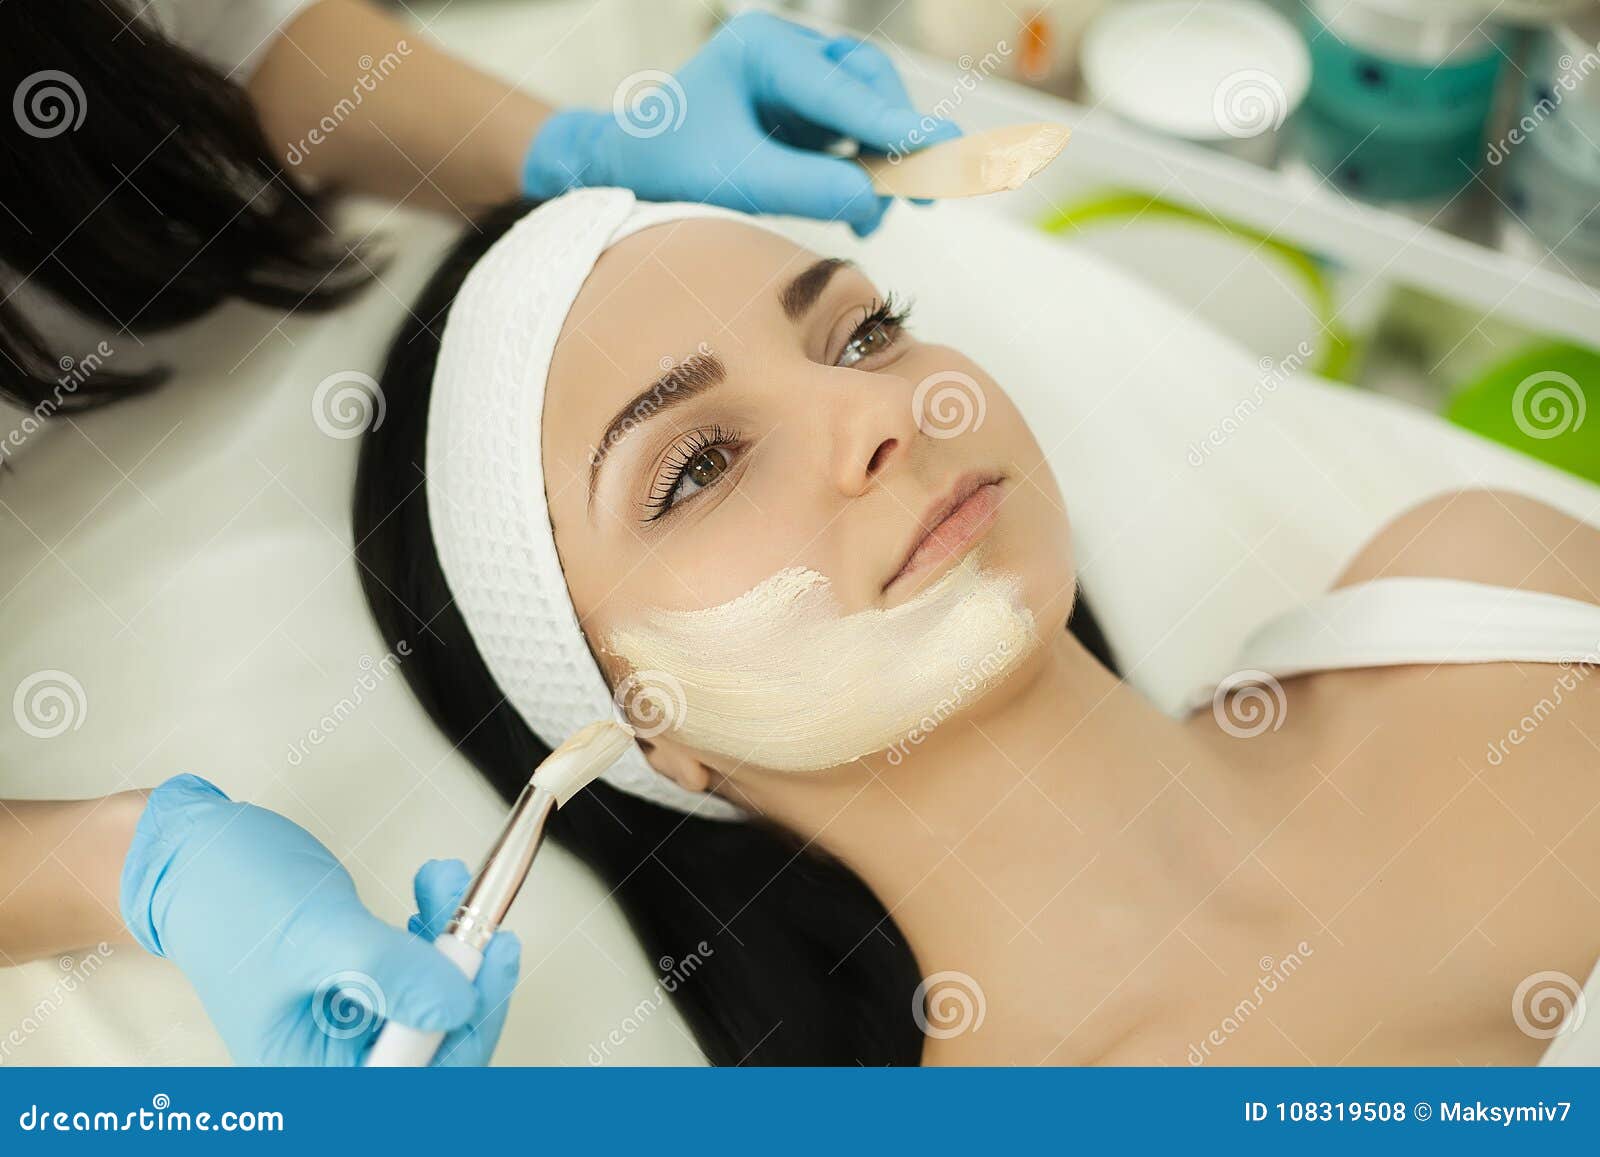 woman receiving professional brush peeling in the cosmetology of